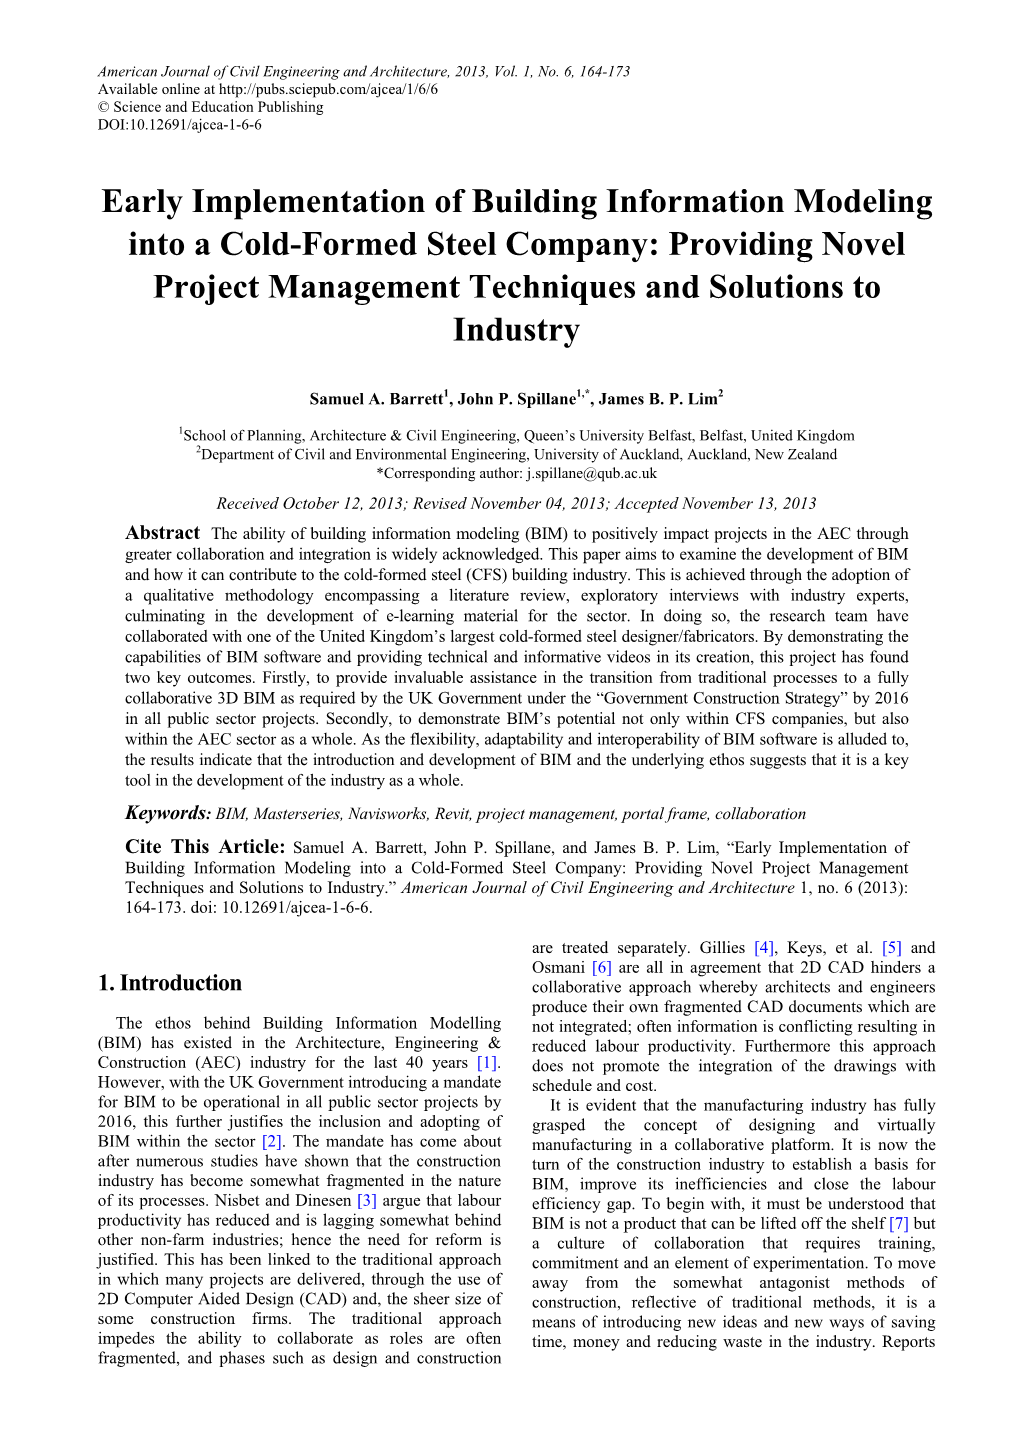 Early Implementation of Building Information Modeling Into a Cold-Formed Steel Company: Providing Novel Project Management Techniques and Solutions to Industry